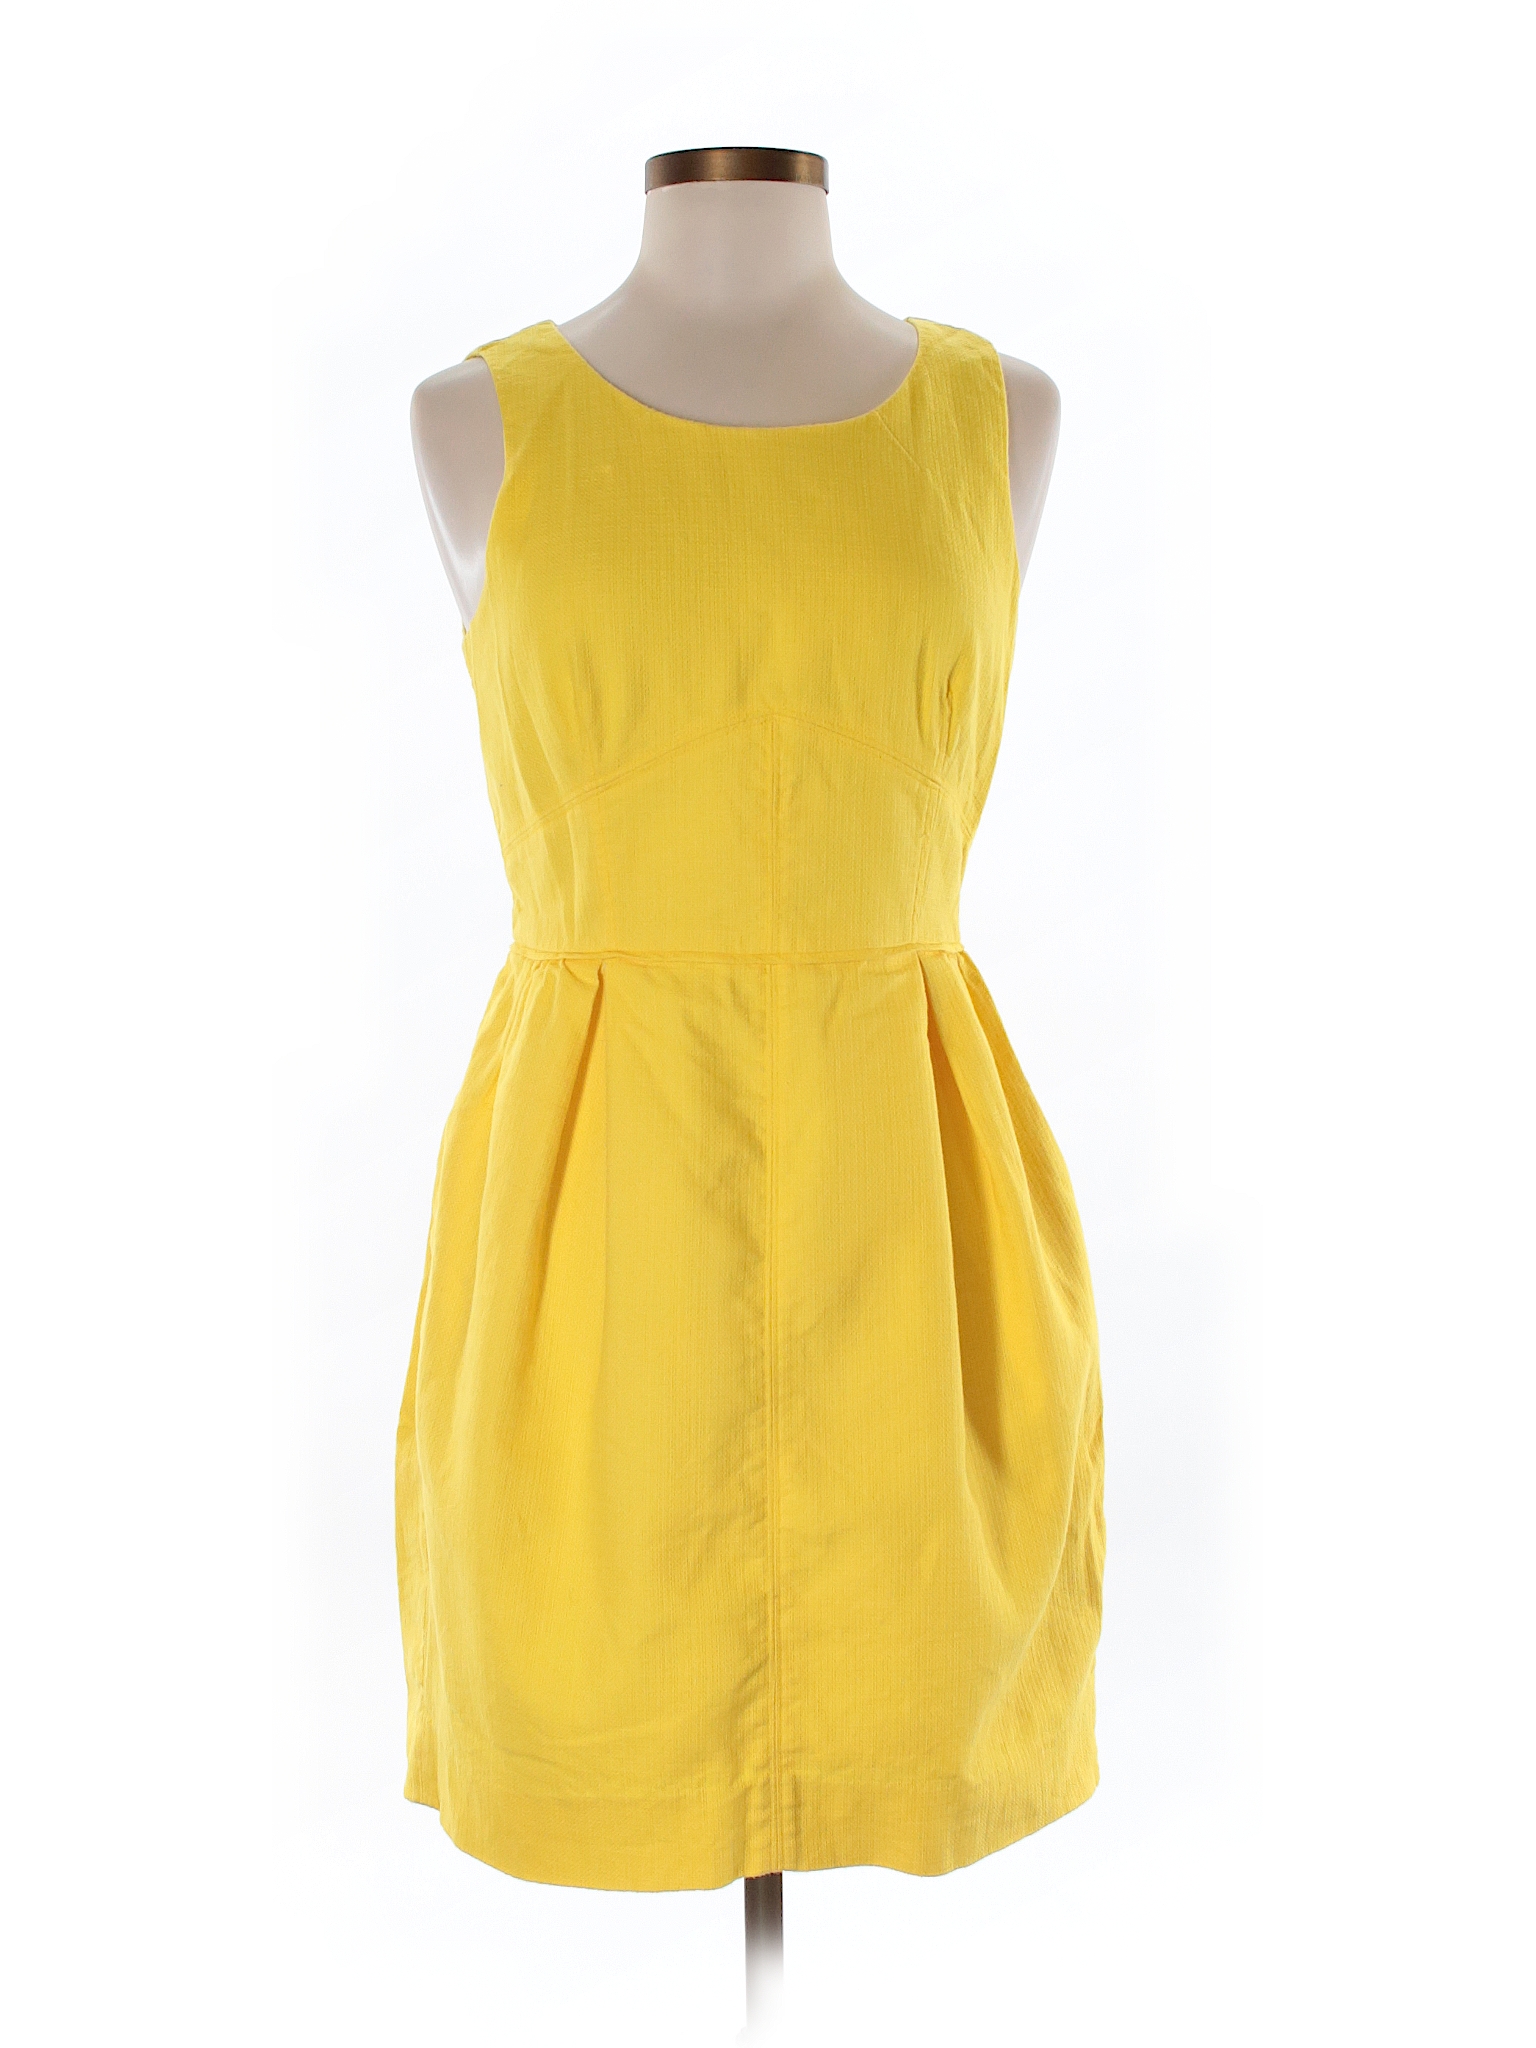 J.Crew Factory Store 100% Cotton Solid Yellow Casual Dress Size 6 - 81% ...